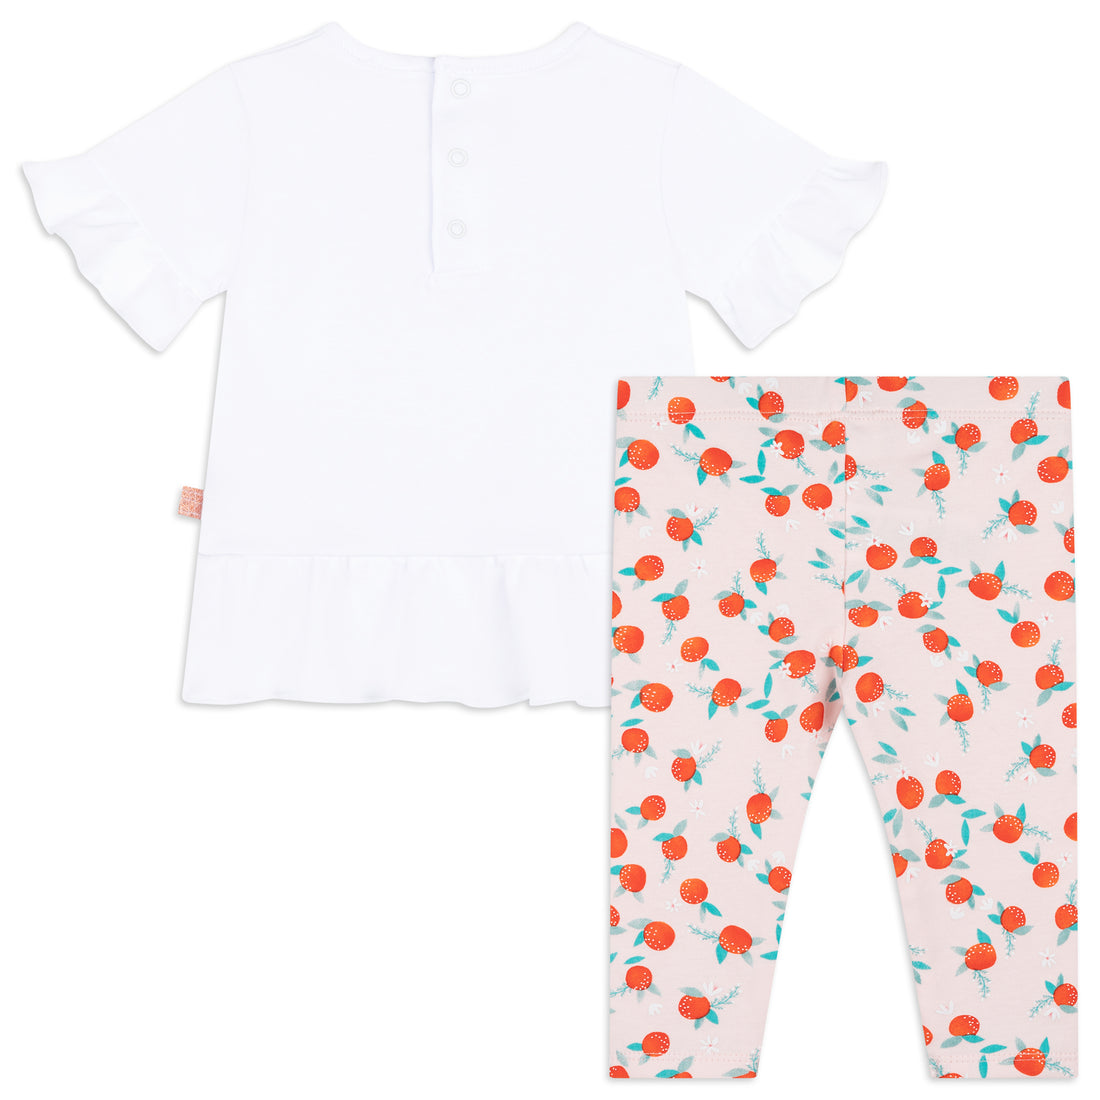 carrément-beau-t-shirt-spring-1-infant-pink-white-carr-s22-y08033-s01-6y- (2)